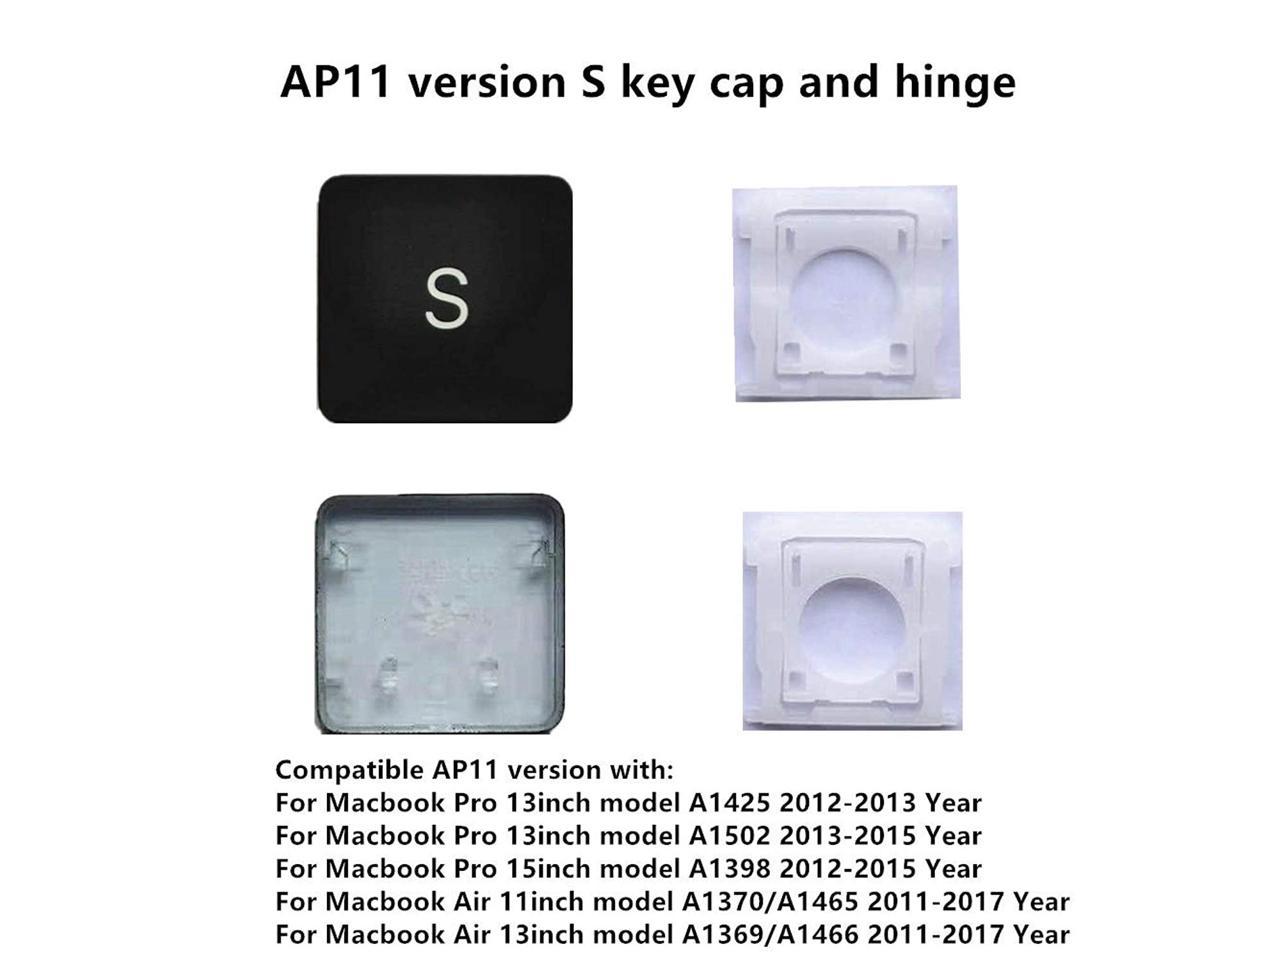 Replacement Individual AP11 Type Fn Key Cap and Hinge for MacBook Pro Model A1425 A1502 A1398 for MacBook Air Model A1369/A1466 Keyboard to Replace The fn KeyCap and Hinge